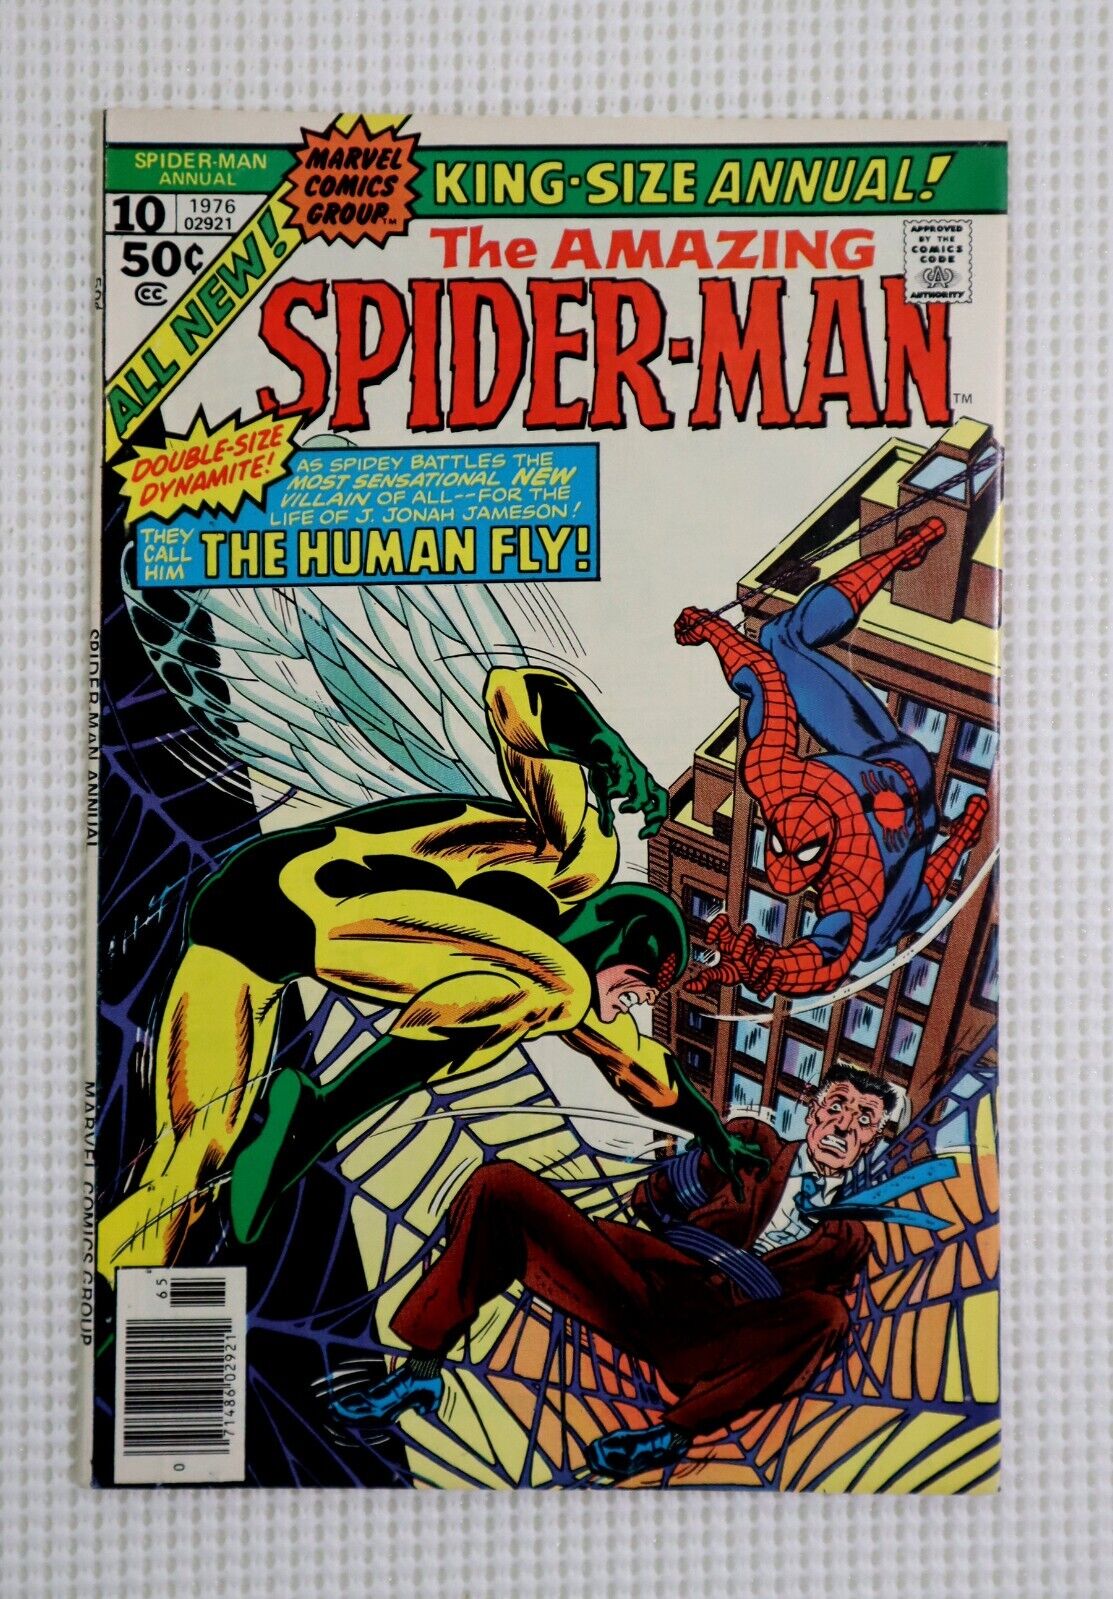 1976 Amazing Spider-Man Annual 10 by Marvel Comics: 1st Human Fly, 50-cent cover